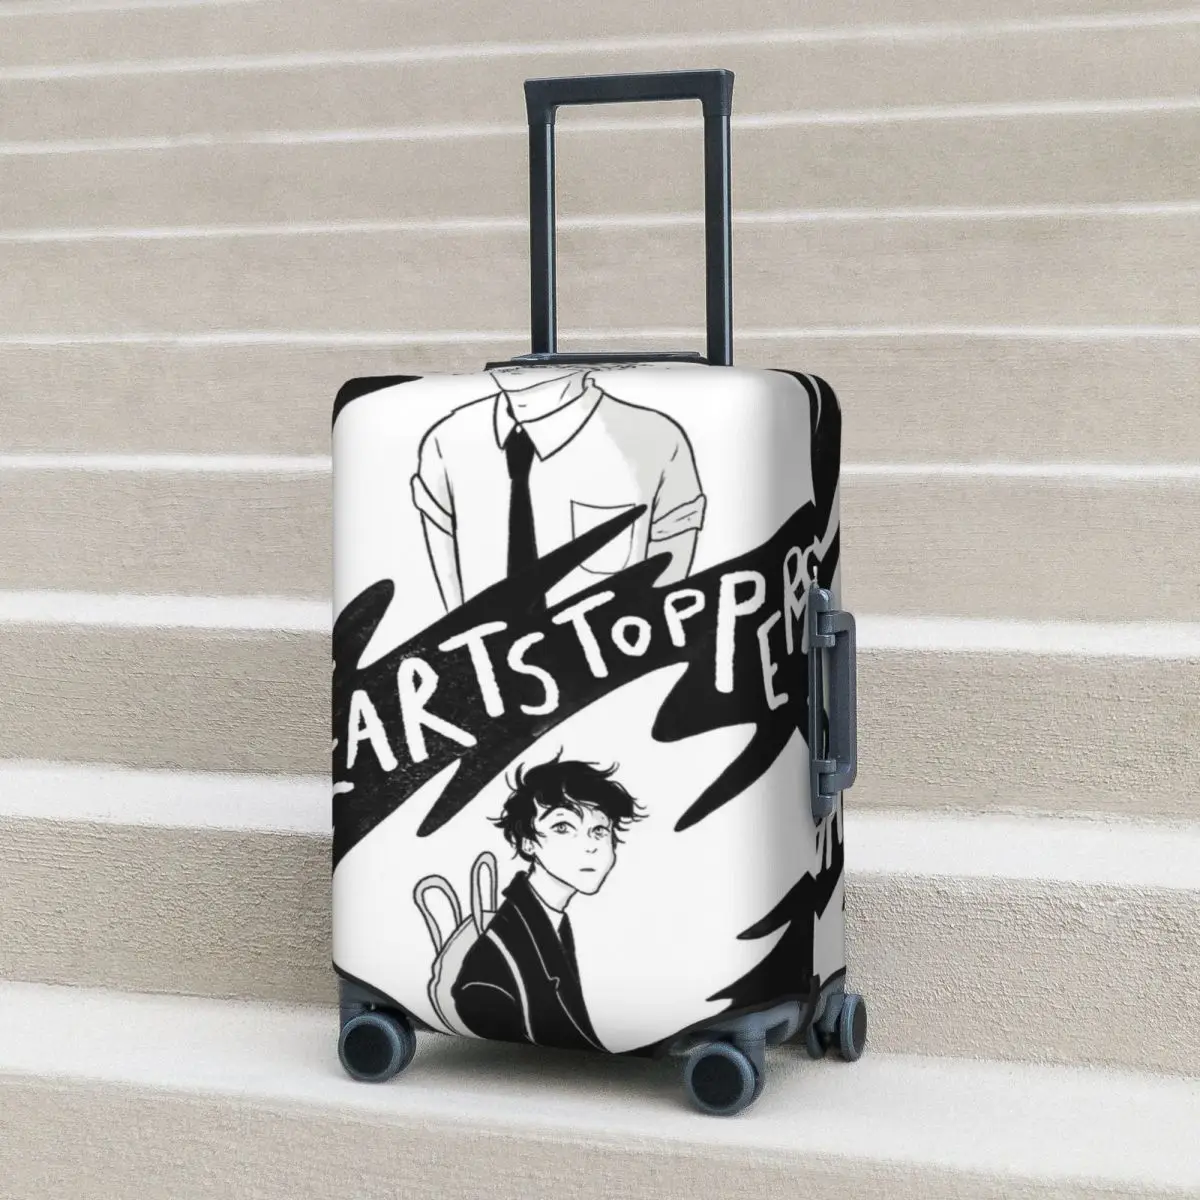 

Heartstopper Suitcase Cover Spiral Oseman Illustration Elastic Cruise Trip Protector Luggage Accesories Holiday